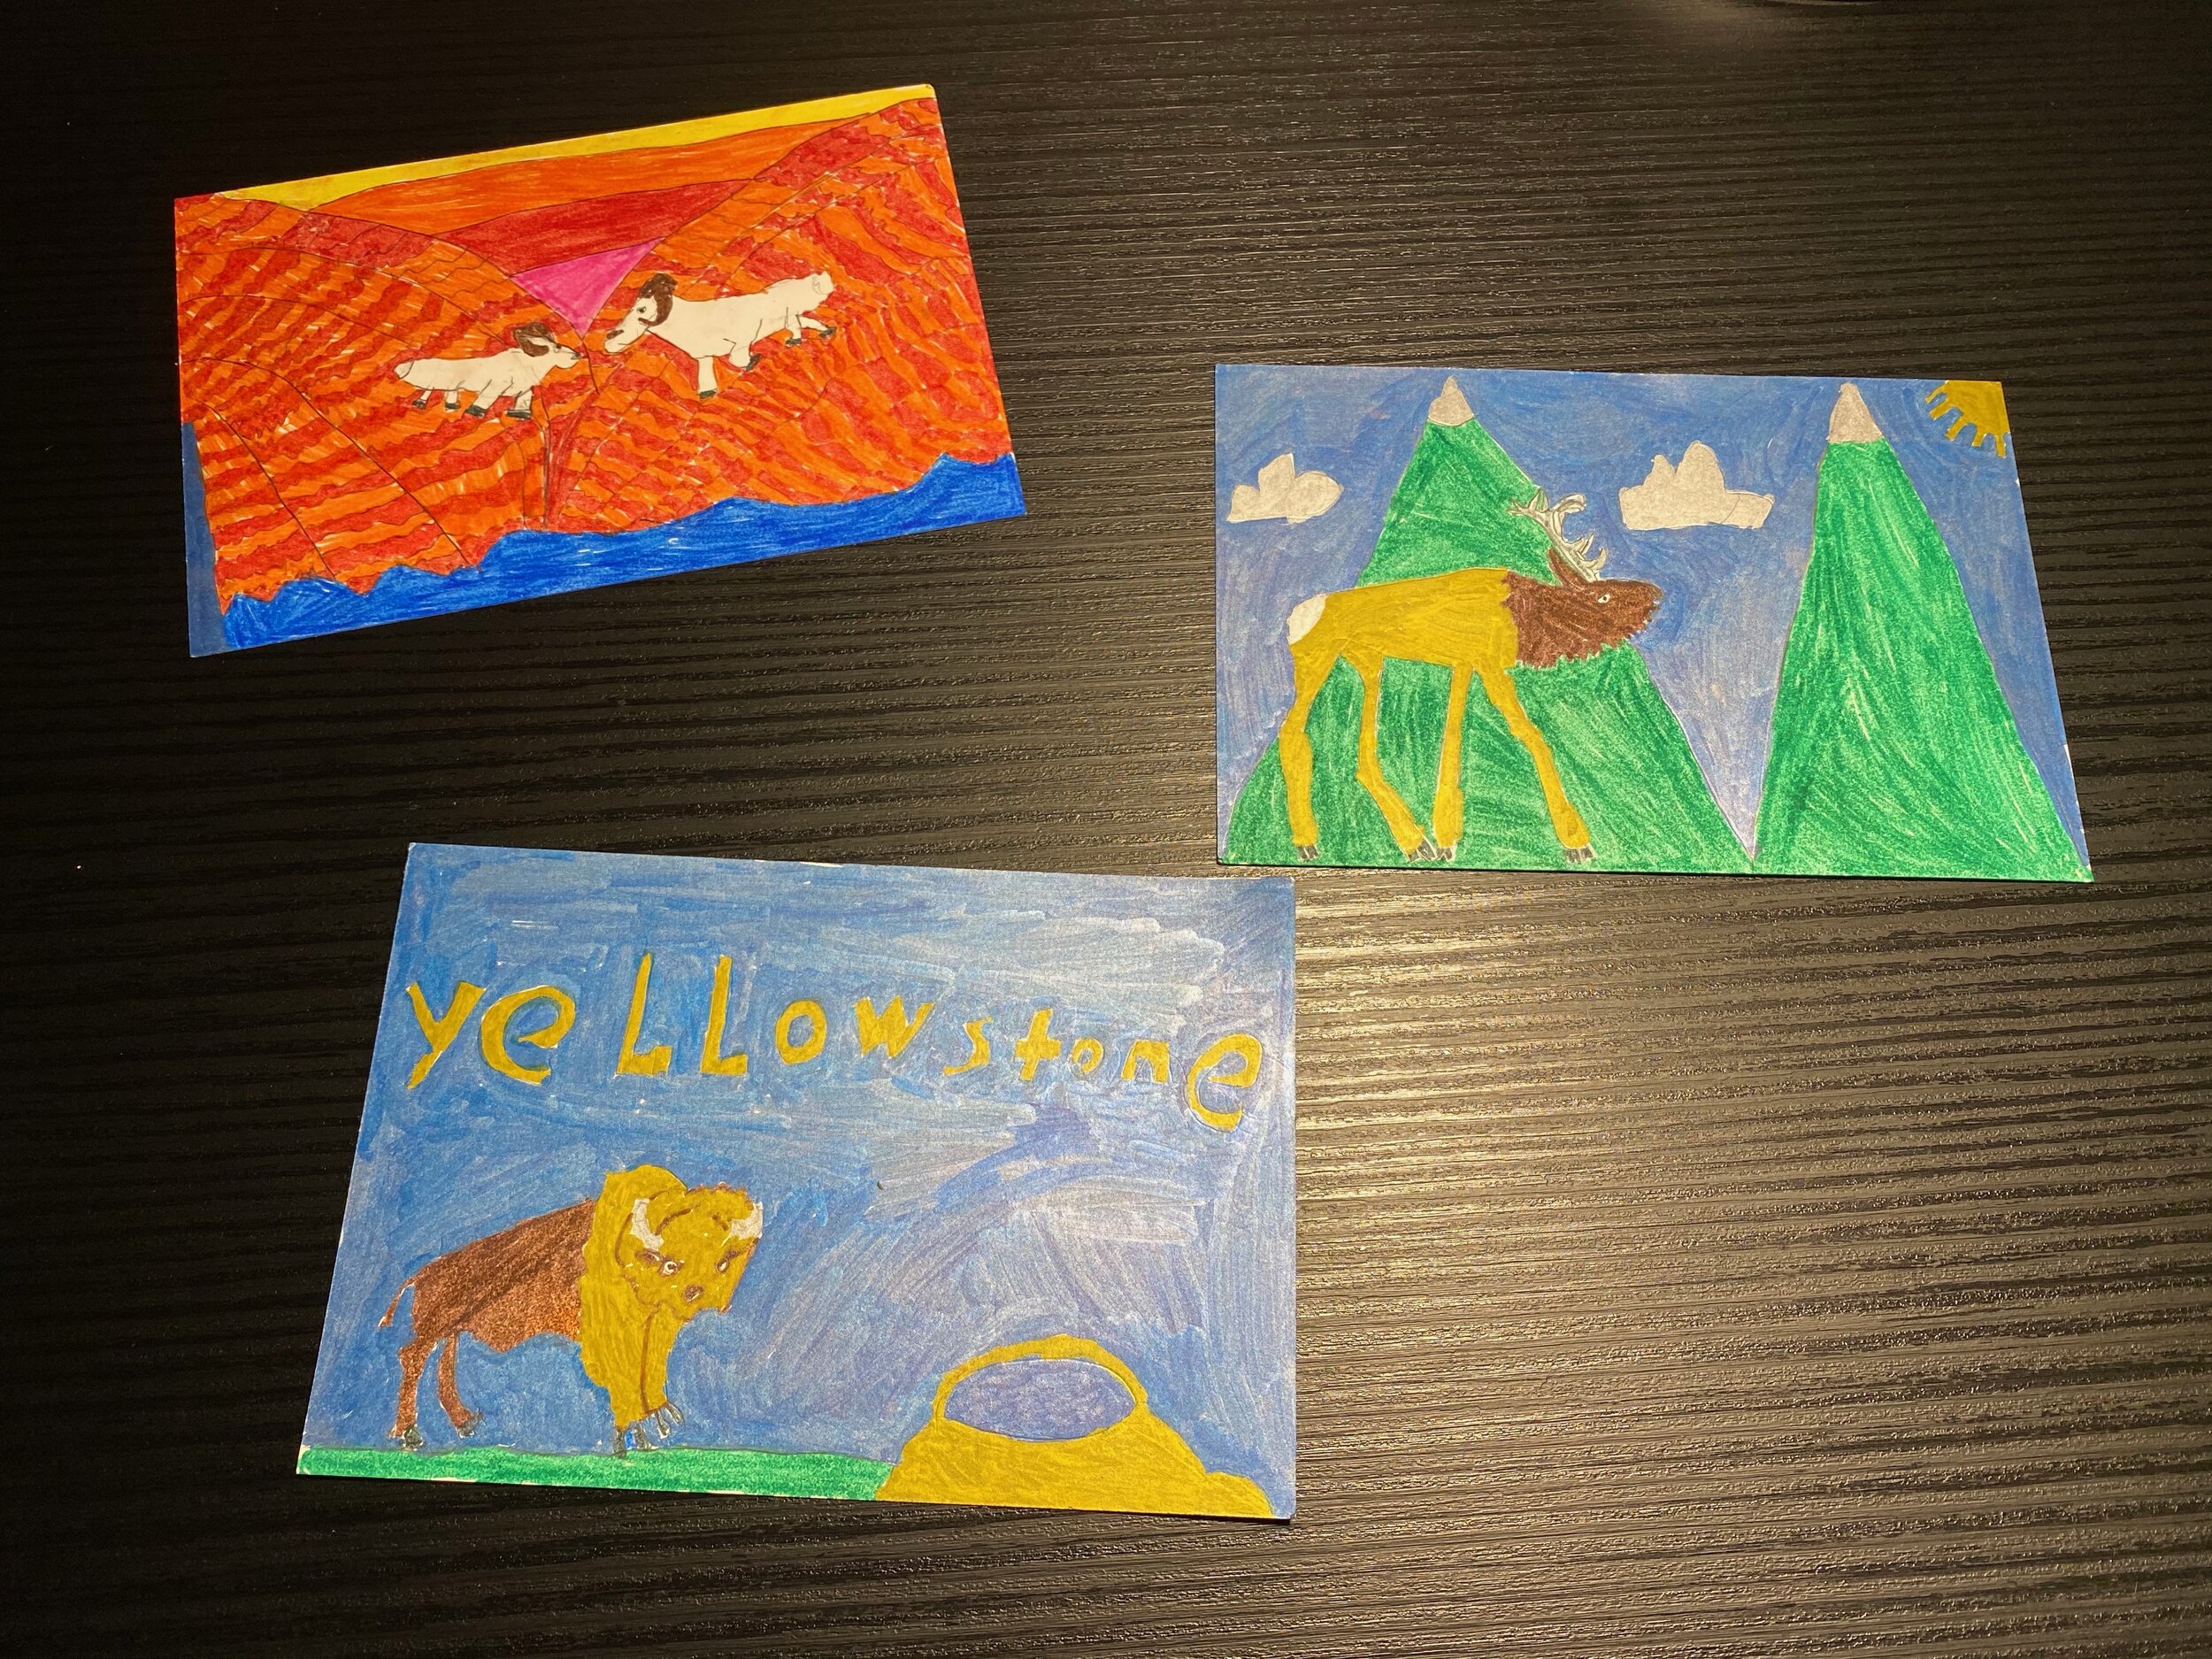 Some of Bunny’s amazing work drawing and coloring her own postcards of bighorn sheep, an elk, and a bison in Yellowstone.  This artwork is entirely her own, please do not share without contacting us first.